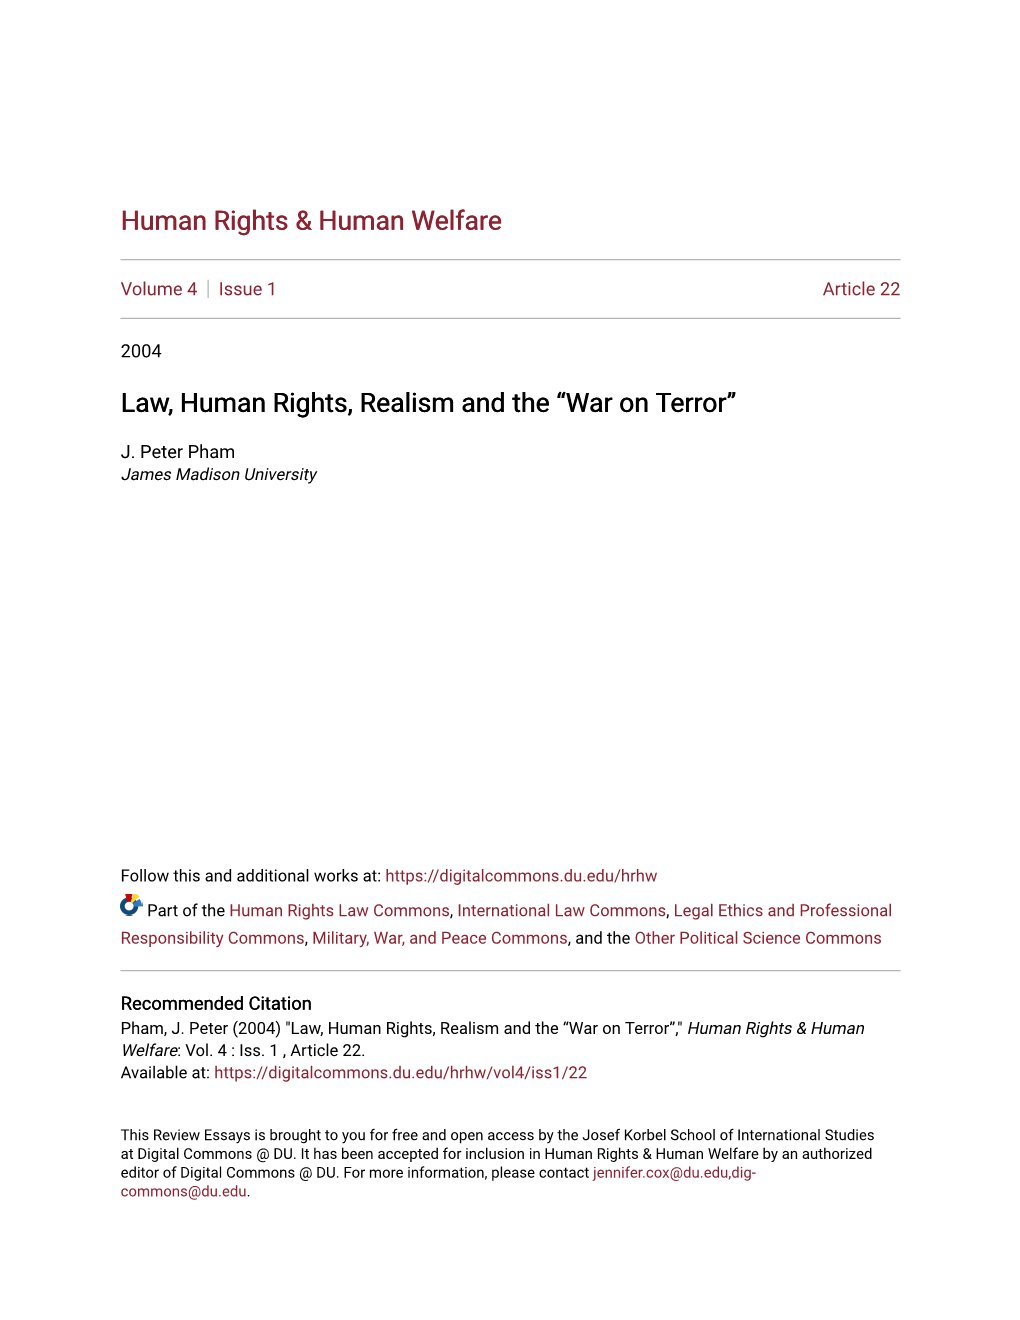 Law, Human Rights, Realism and the “War on Terror”